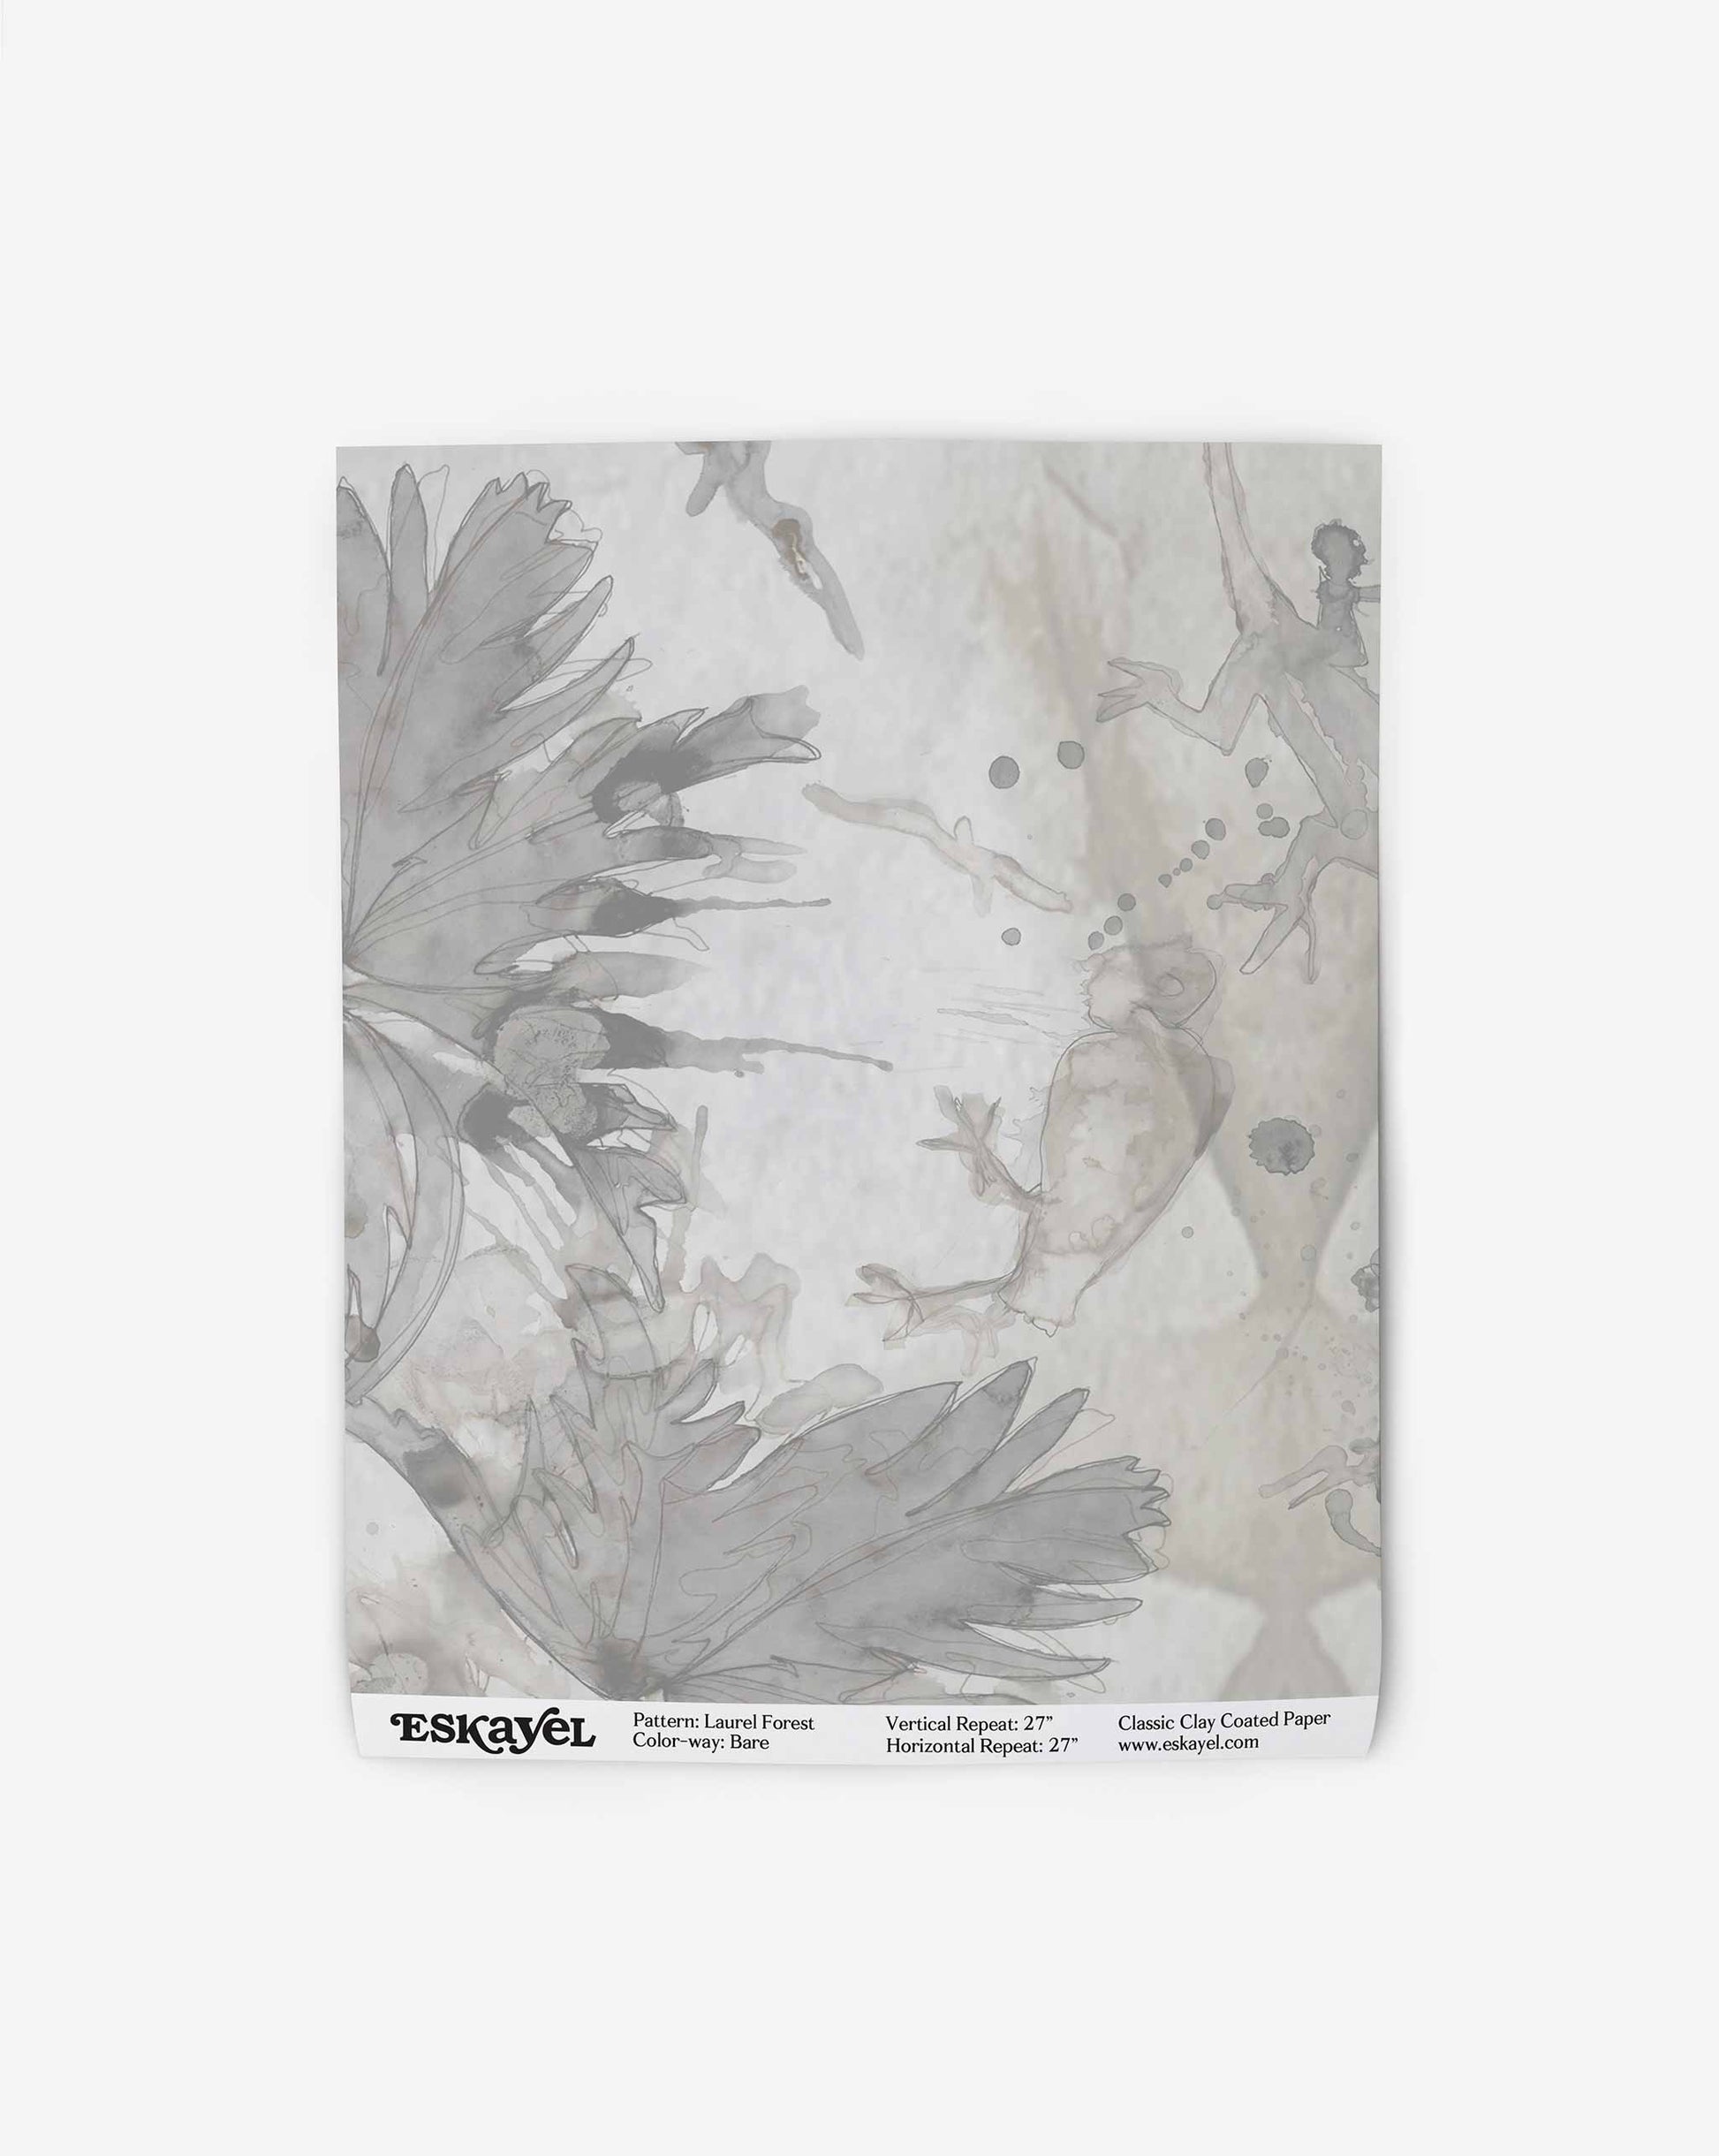 A high-end Laurel Forest Wallpaper sample with a tropical leafy watercolor design, including a watermark of the brand "Eskayel" at the bottom right.